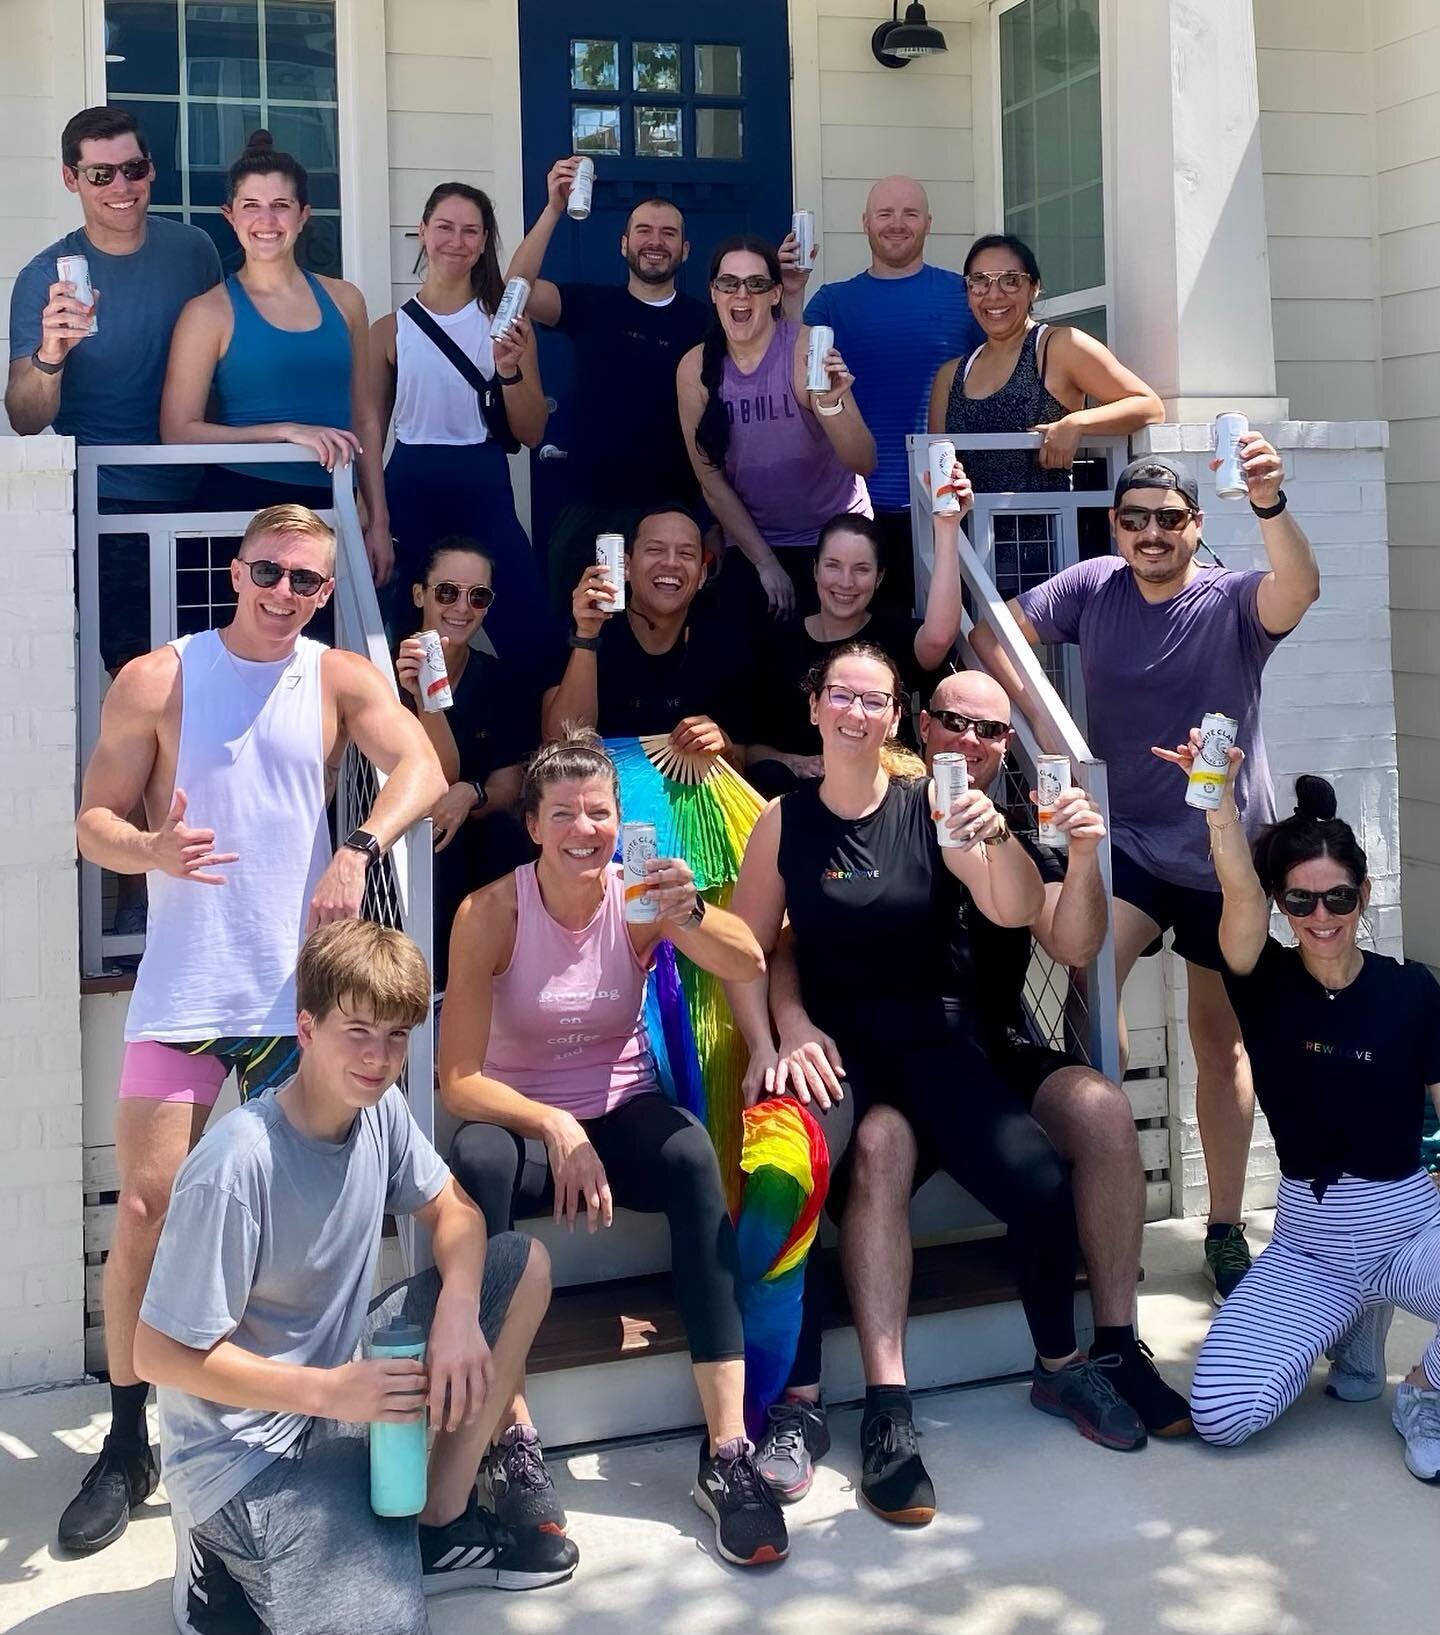 Cheers 🥂 for #pride! 

Crew Fitness Houston raised $1000 for the Montrose Center, an organization that empowers #lgbtq individuals and their families to live healthier, more fulfilling lives. Services include mental health counseling, HIV care &amp;